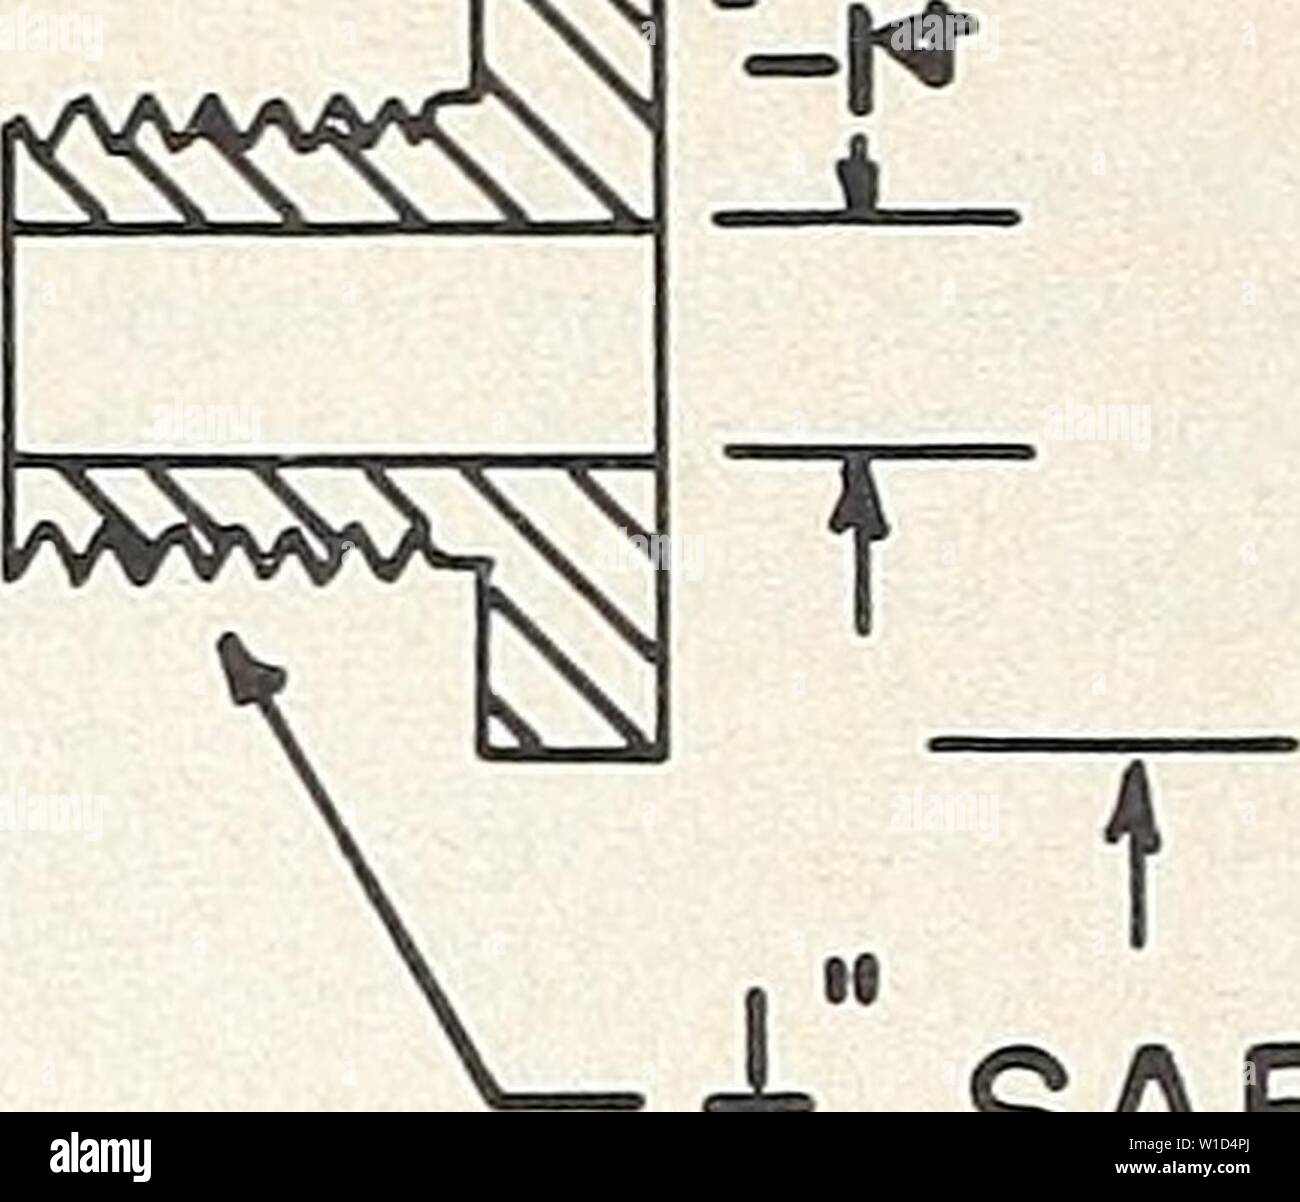 Archive image from page 9 of Design and operation of a. Design and operation of a carbon-14 biosynthesis chamber . designoperationo911smit Year: 1962  |-t'Hfk jj'HEX    4 SAE THD. -&gt;iiM—hft- DRILL HOLE FOR NO. 12 WIRE Stock Photo